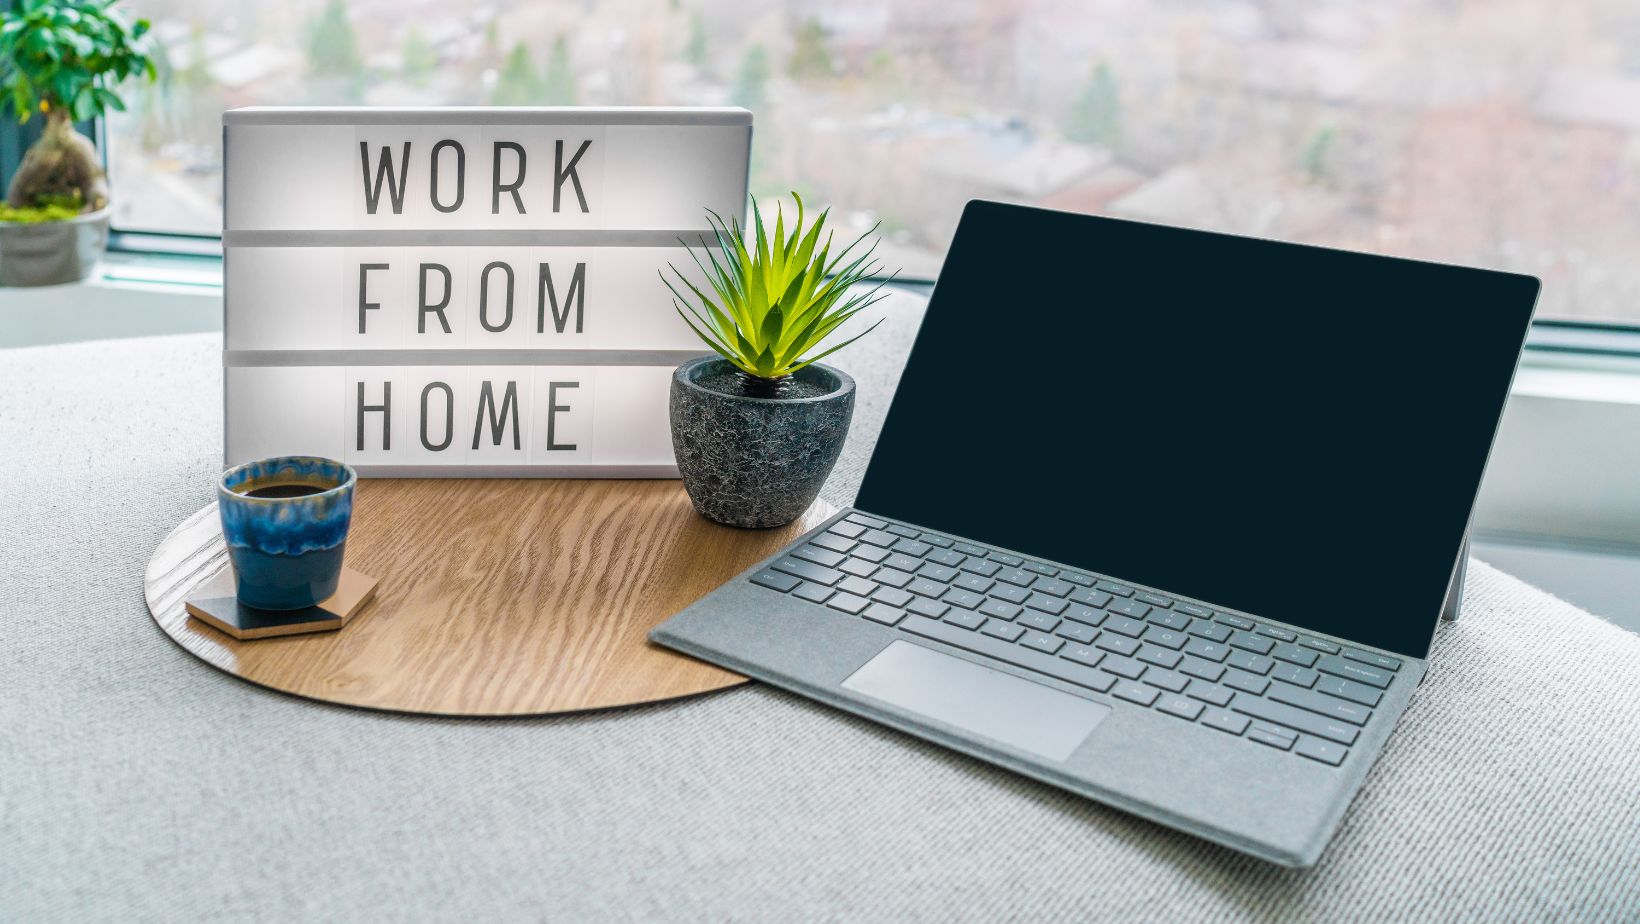 Work From Home Jobs That Don't Require a High School Diploma or GED